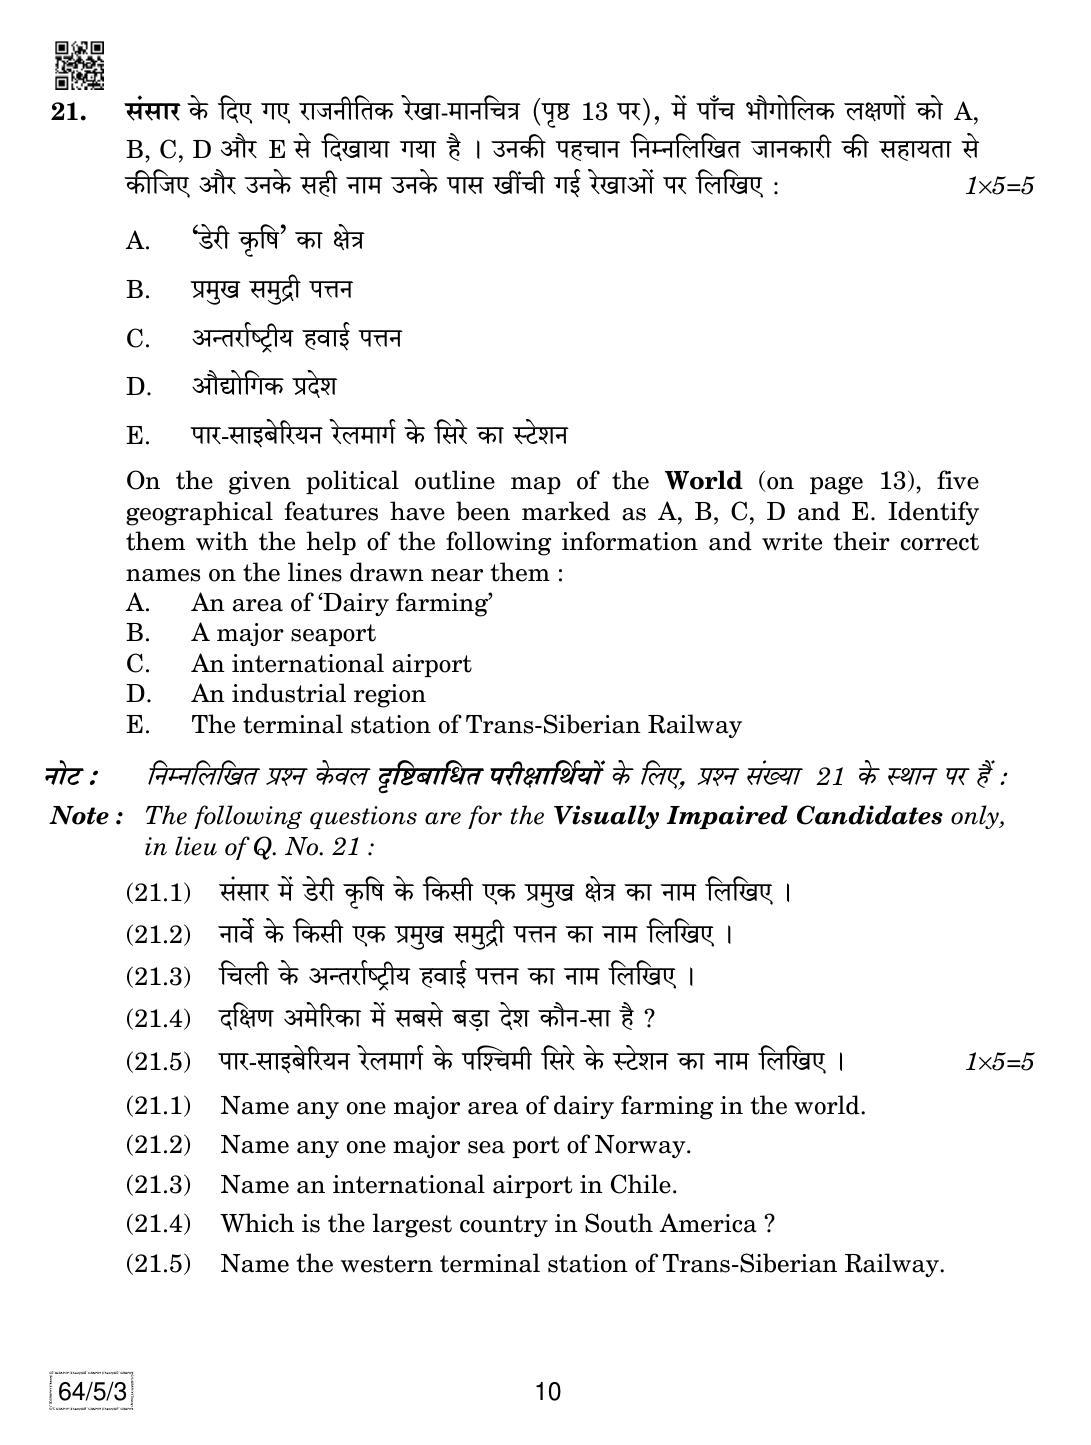 CBSE Class 12 64-5-3 Geography 2019 Question Paper - Page 10